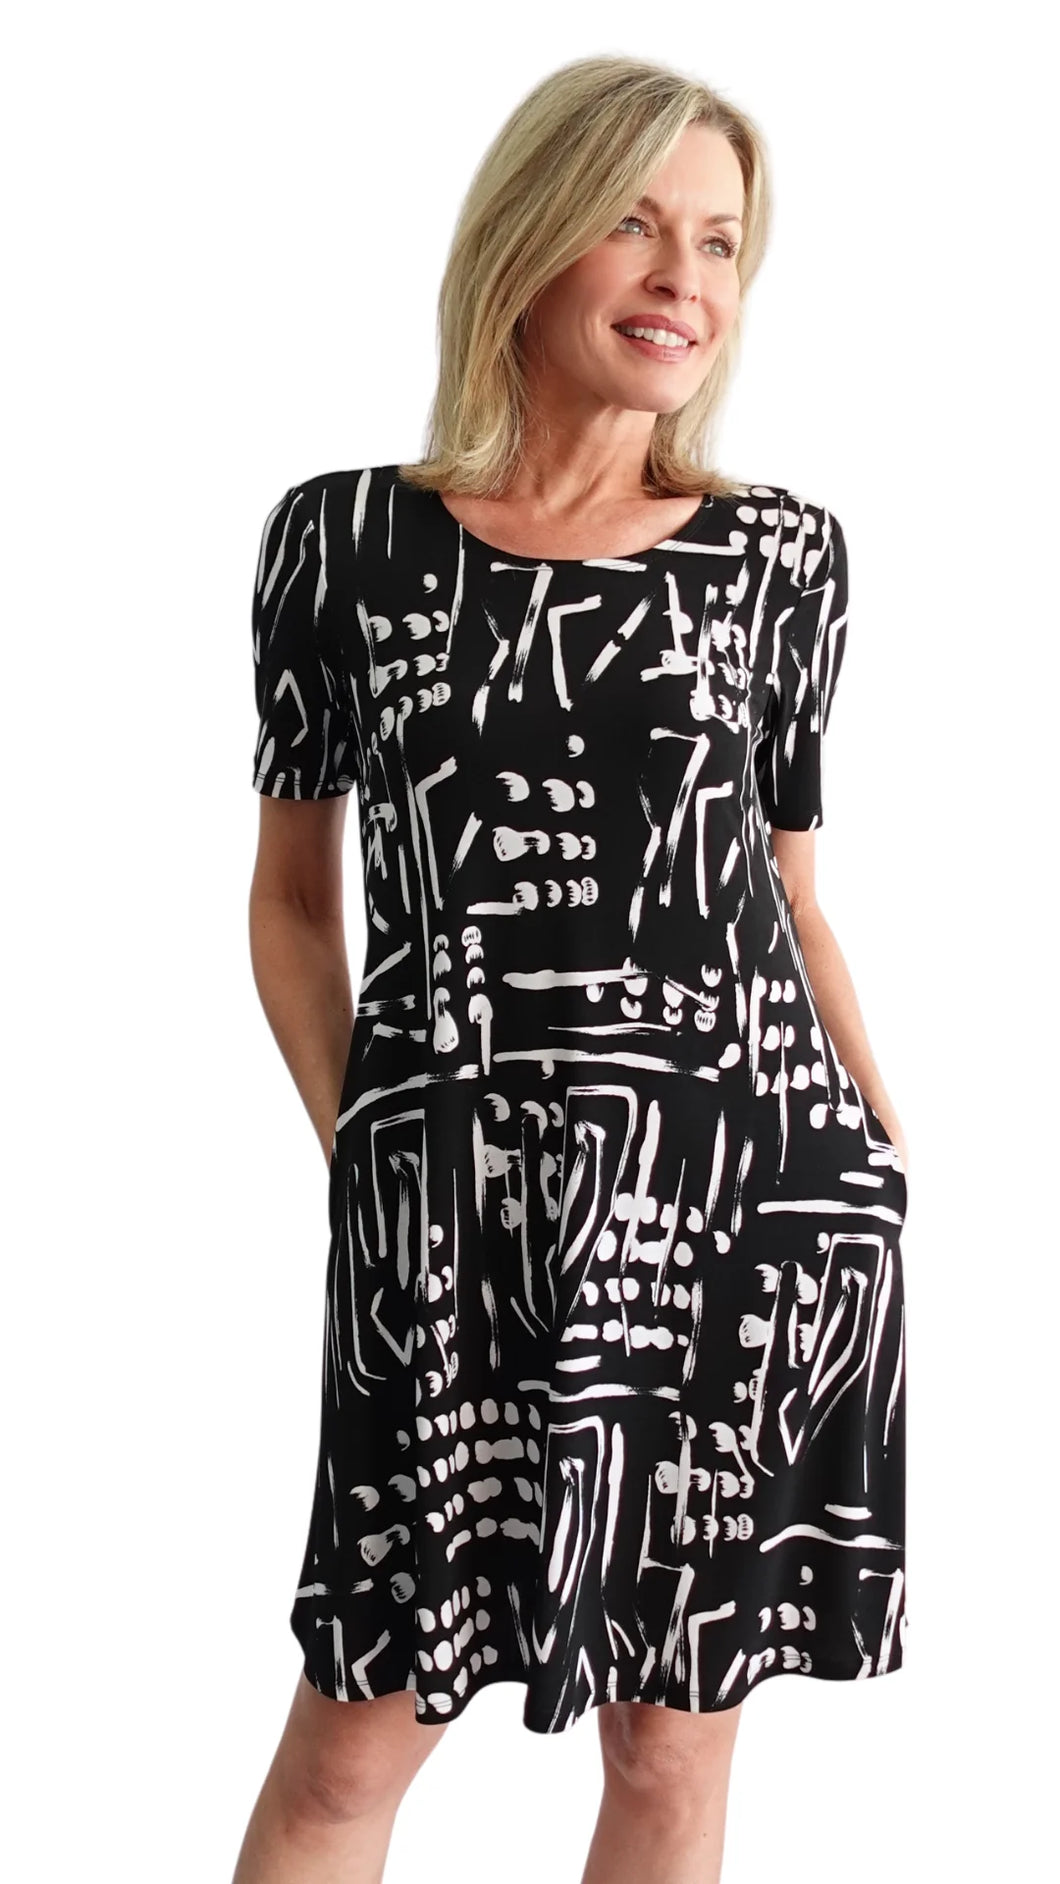 SOFTWORKS BLACK/WHITE ABSTRACT PRINT DRESS